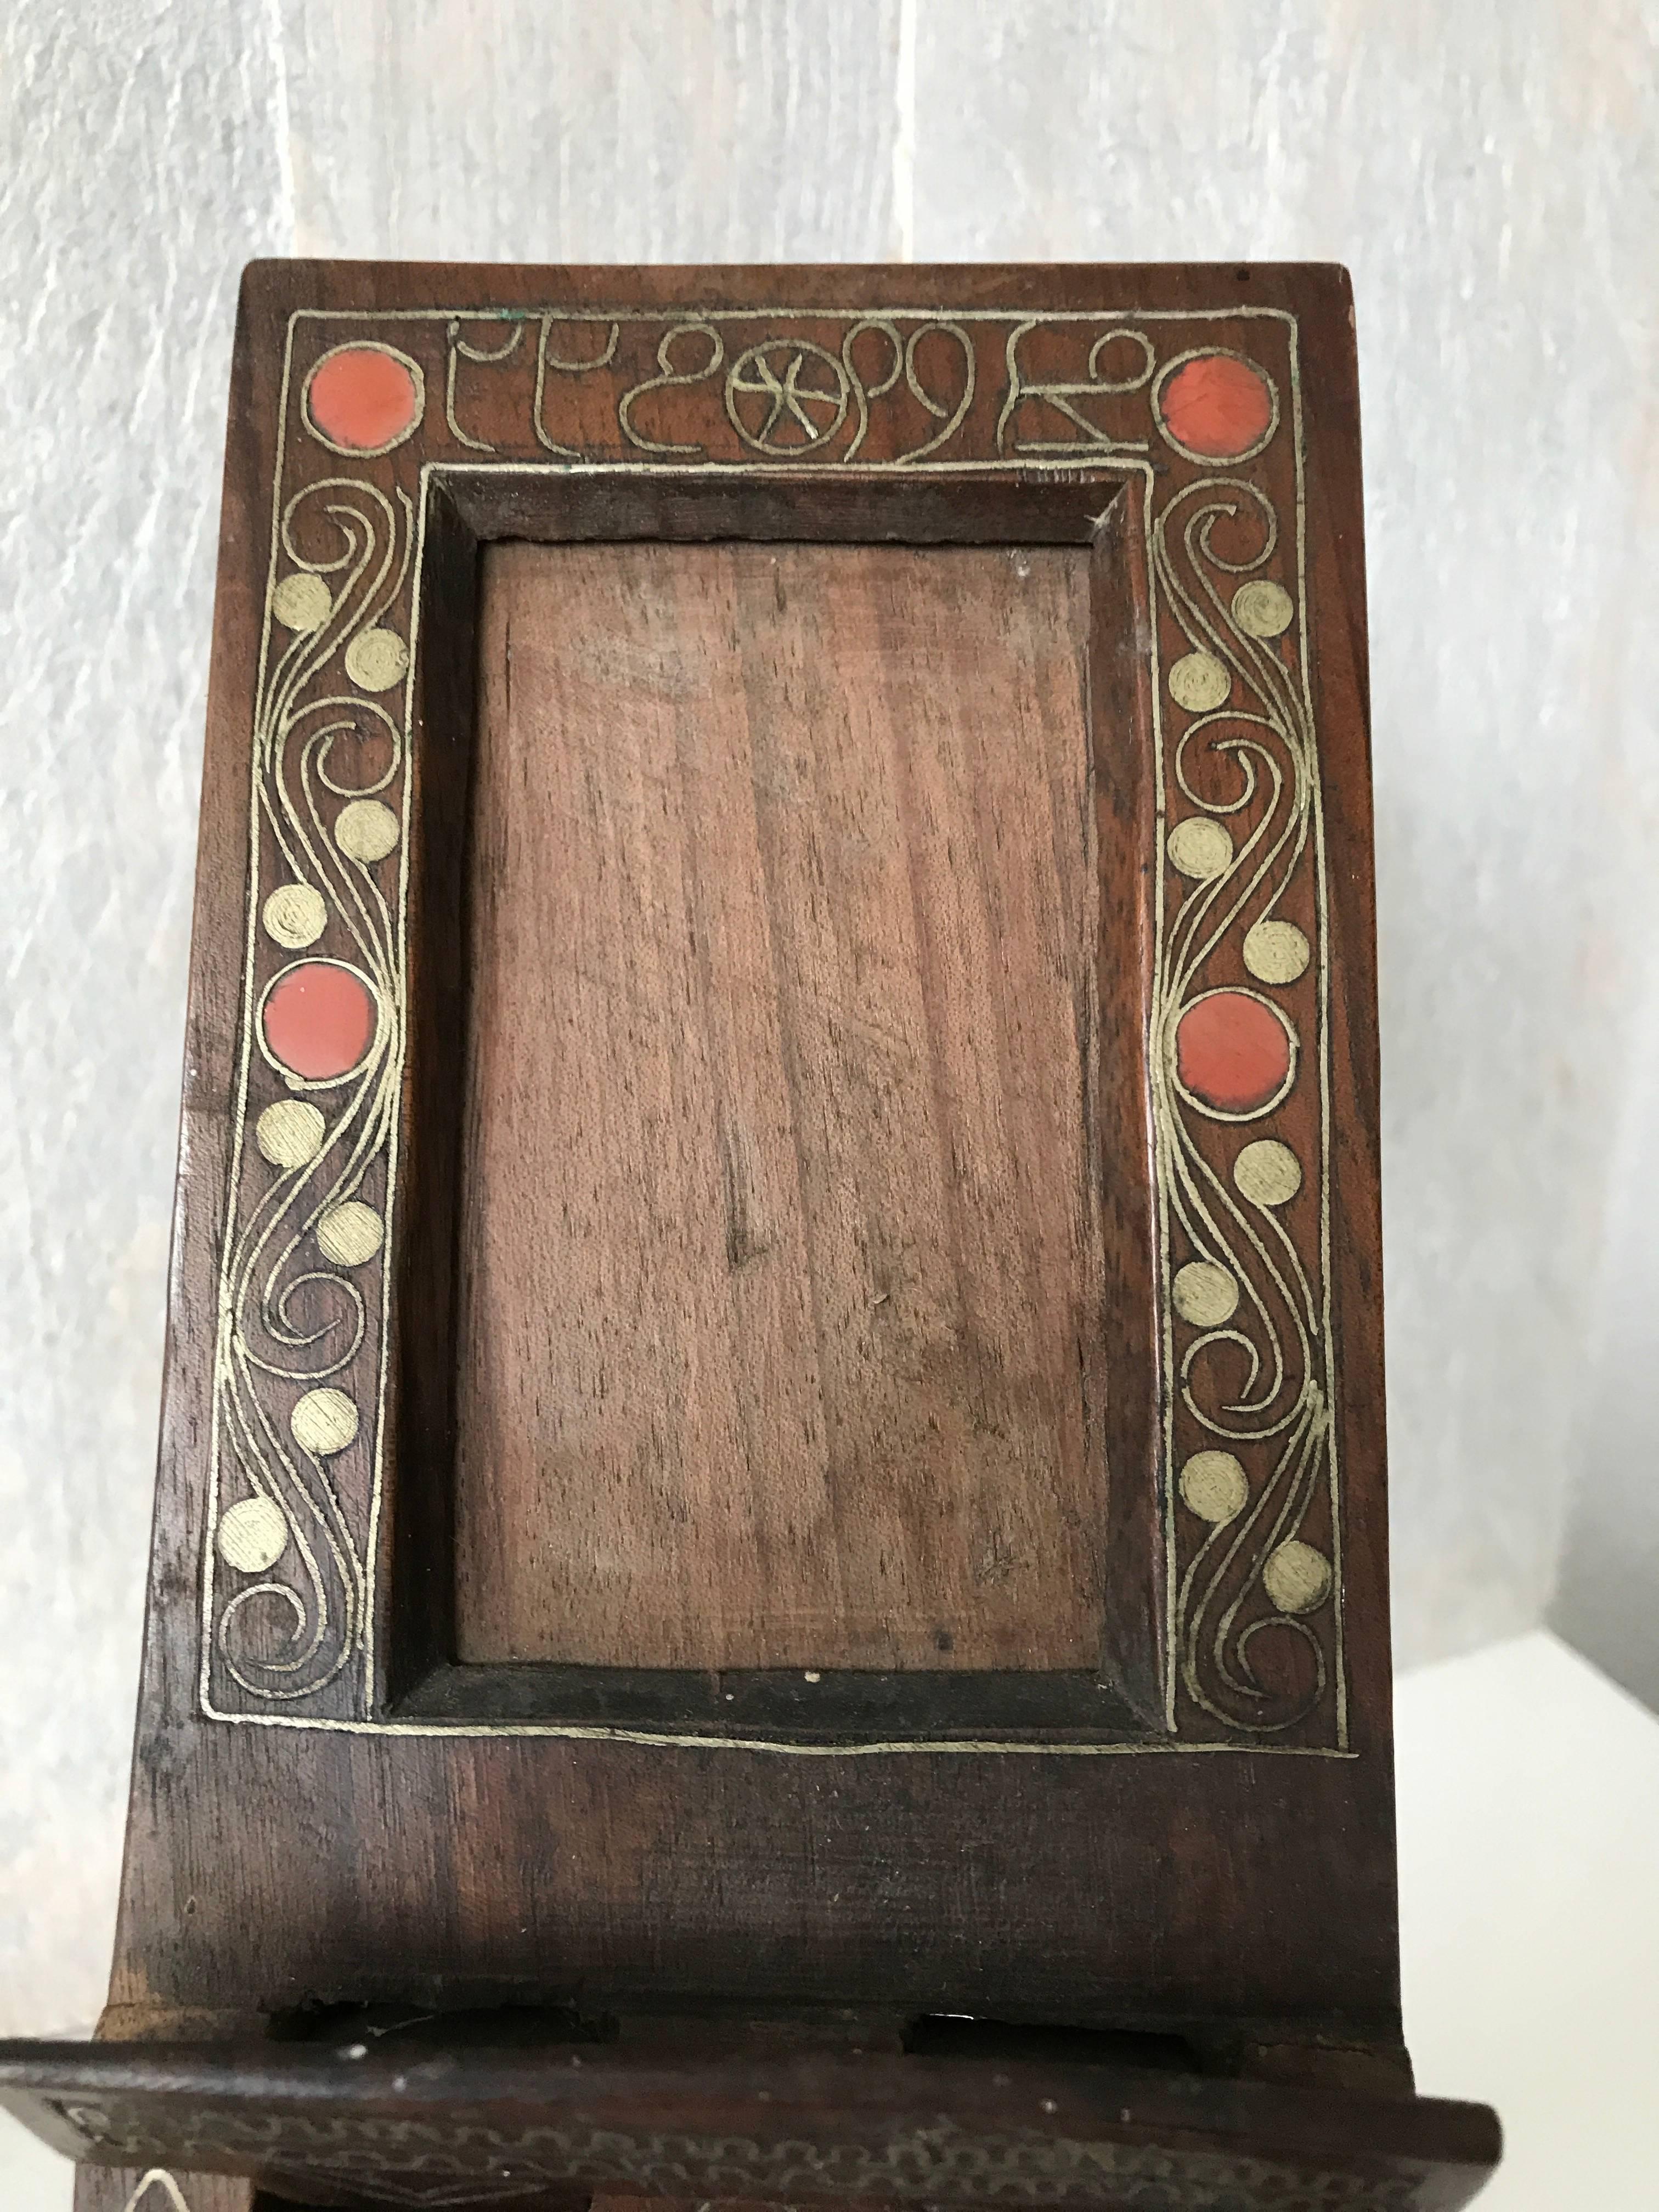 Asian Arabic Antique Wooden Photo or Picture Frame Easel Inlaid Brass Scrolling Motifs